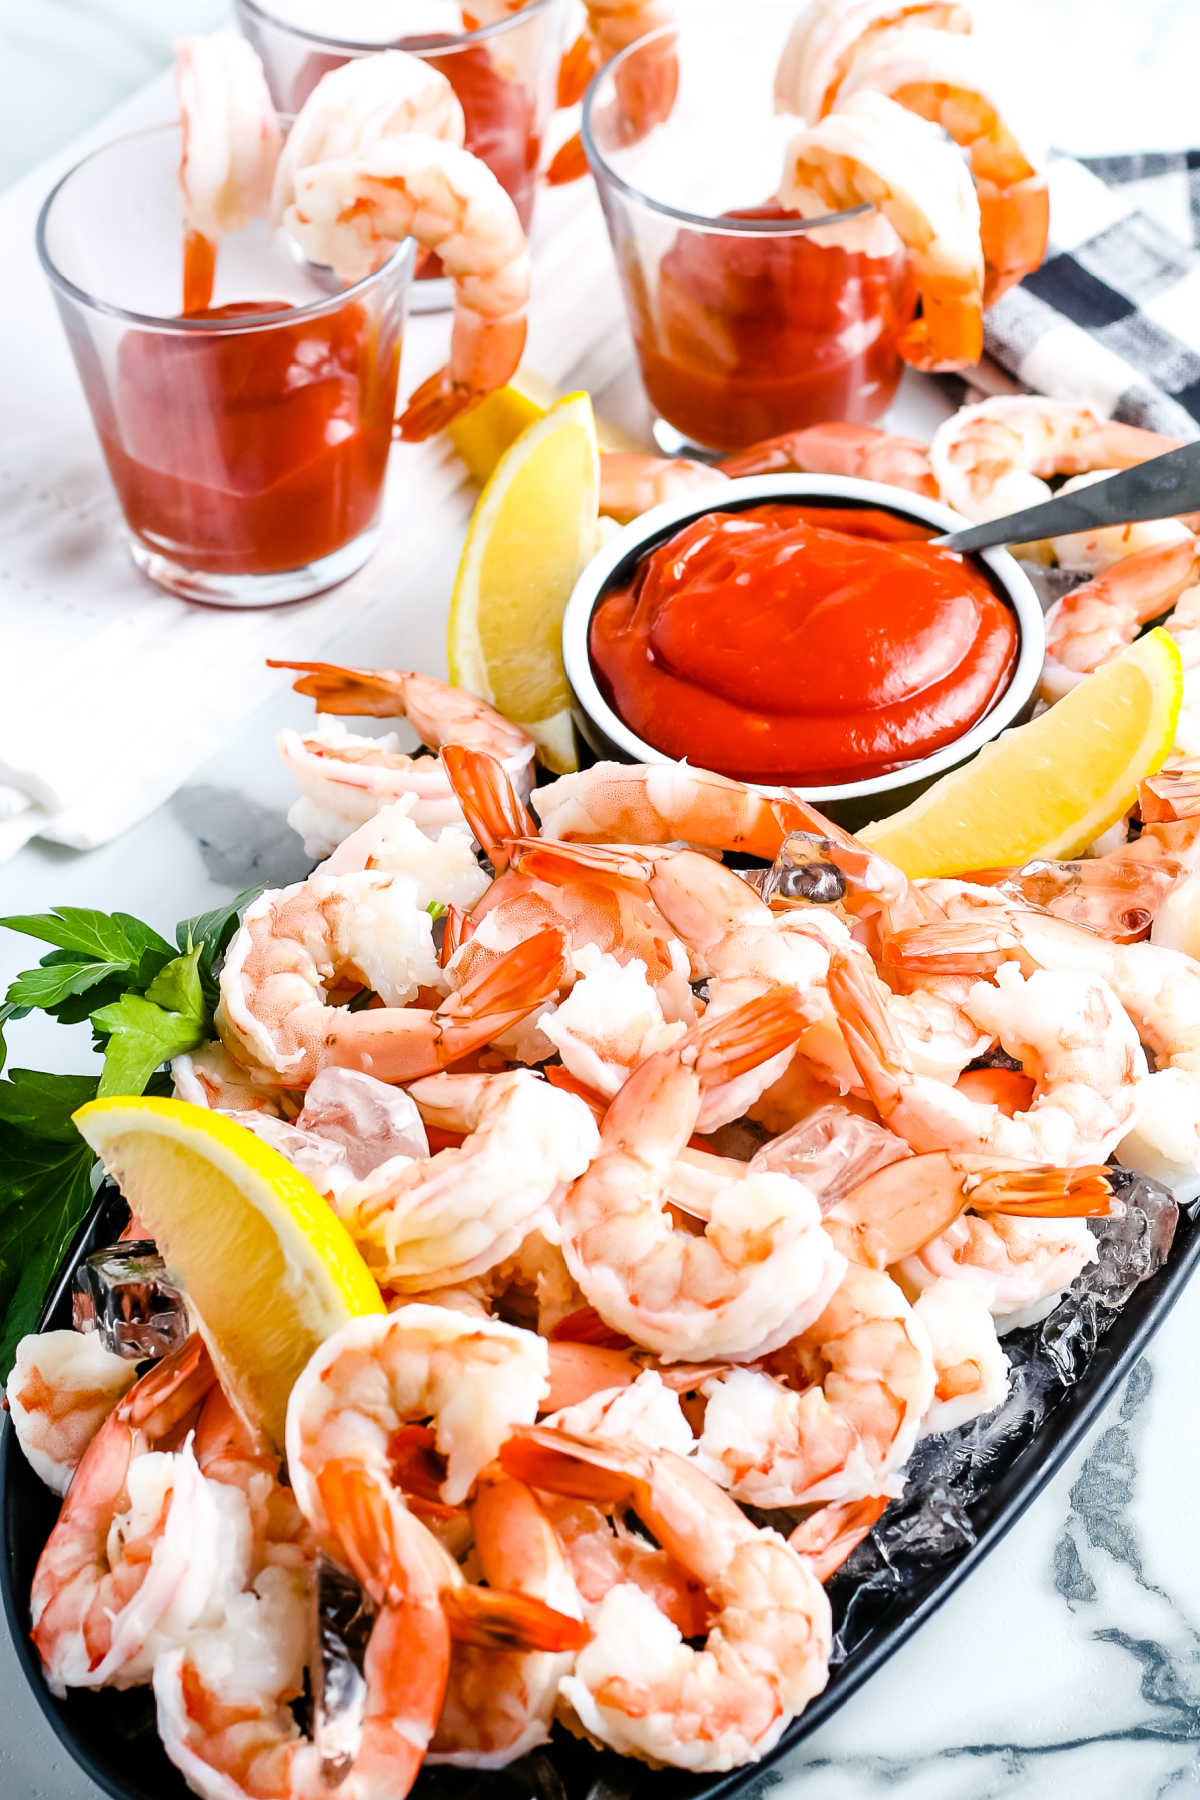 This Shrimp Cocktail and Shrimp Cocktail Sauce recipes are party staples. Making homemade shrimp cocktail is so easy, and it will save you money! via @foodfolksandfun